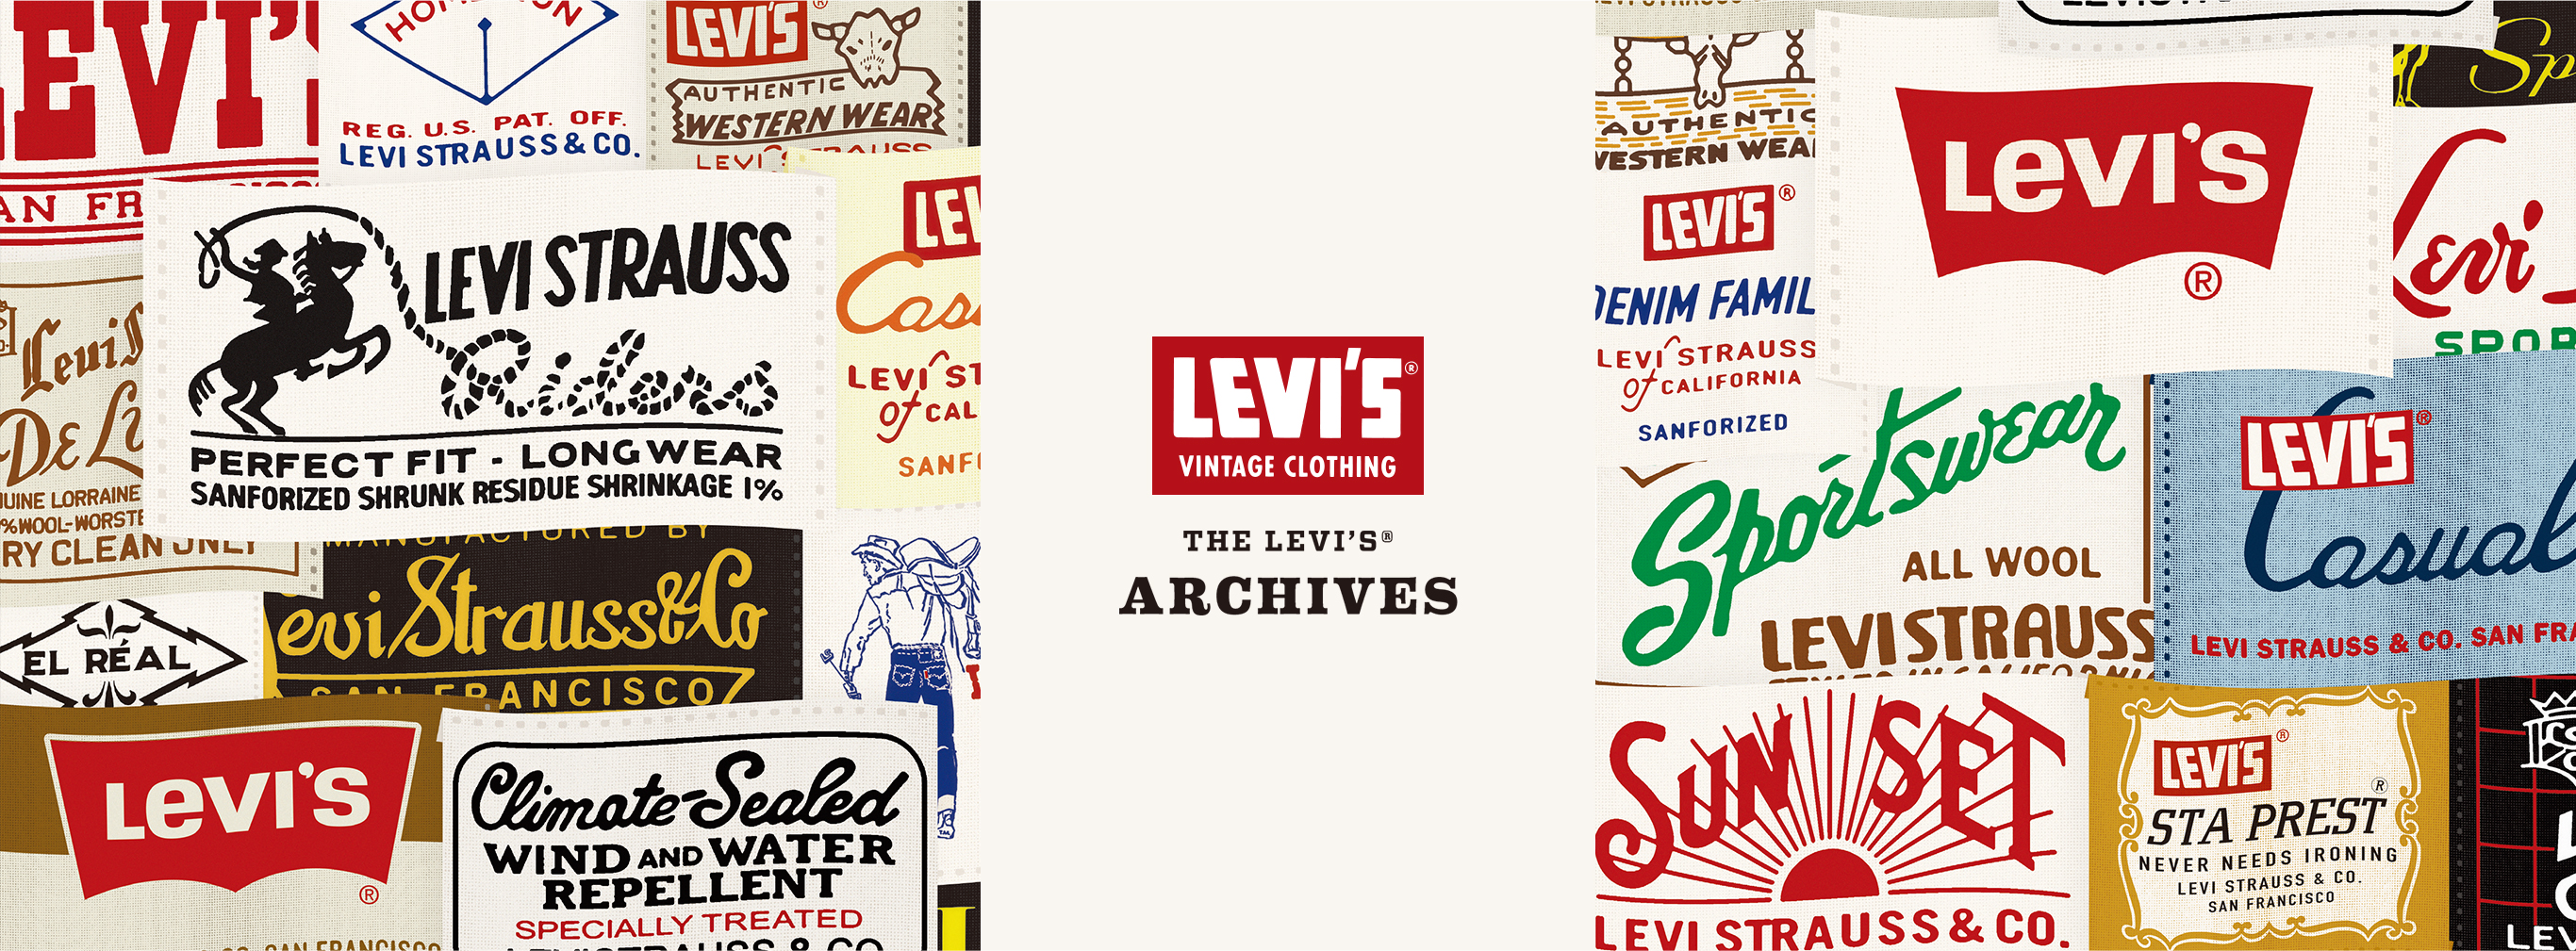 THE LEVI’S® ARCHIVES